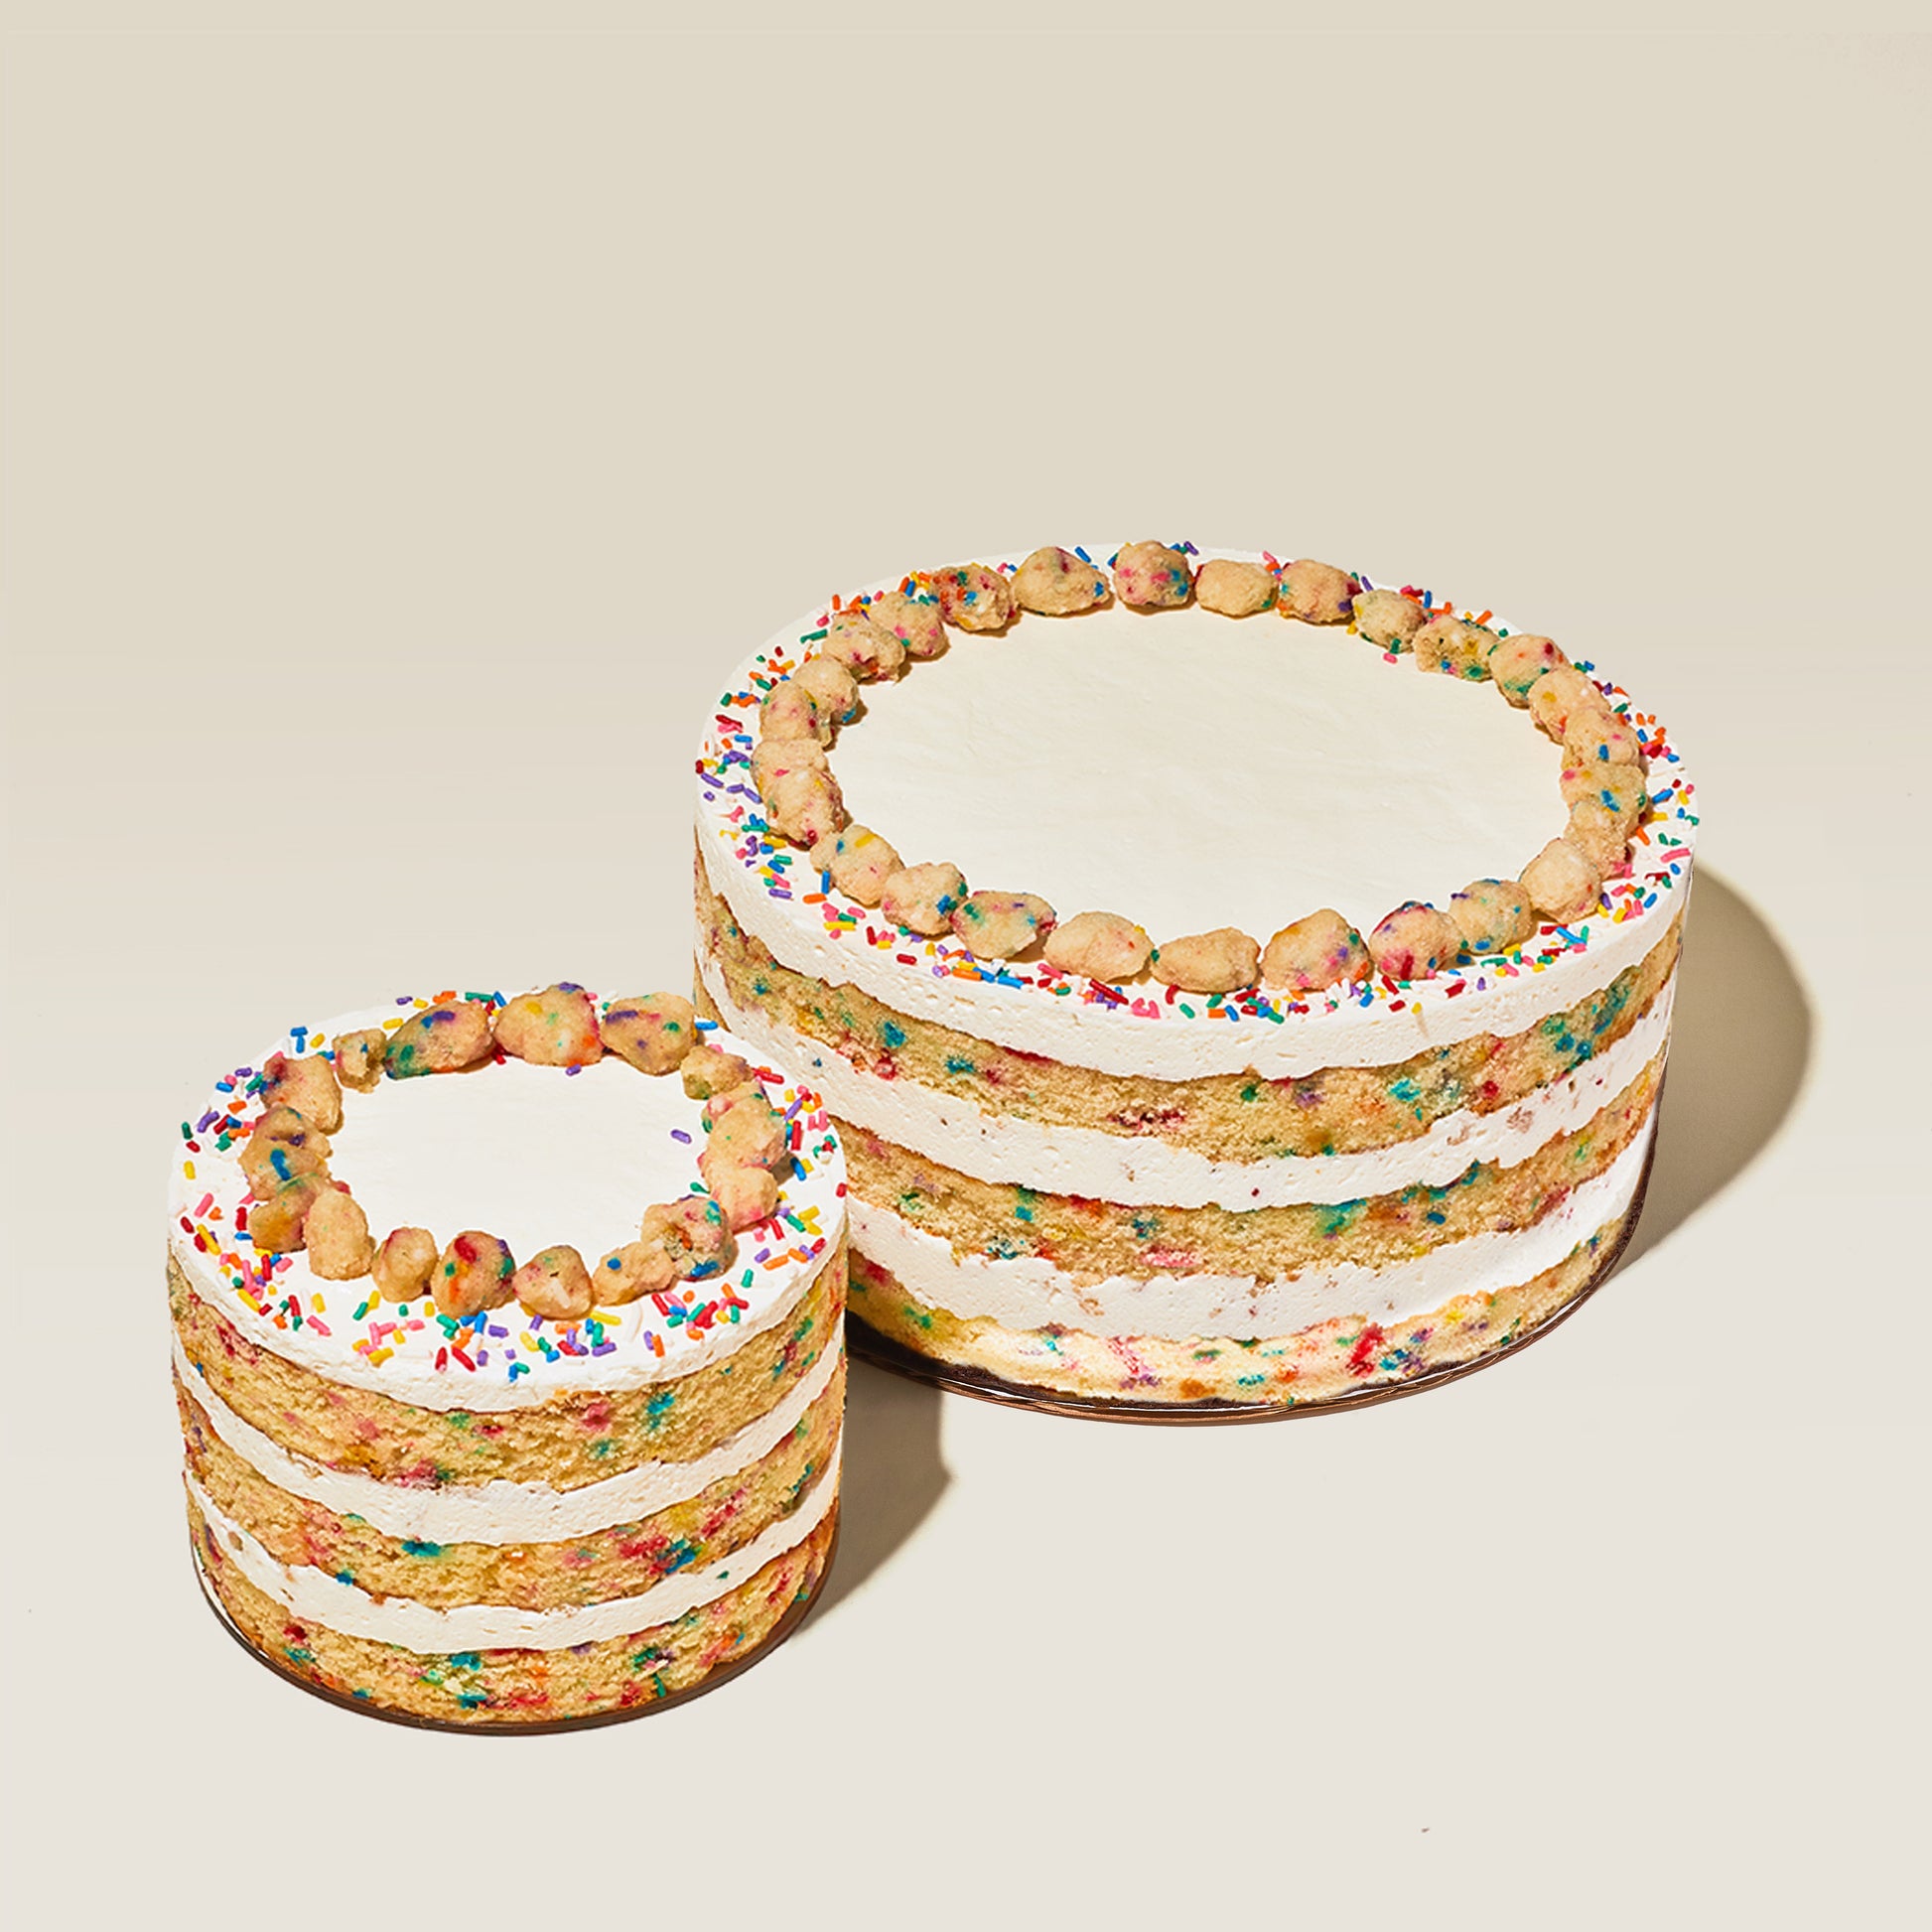 6-inch and 10-inch Birthday Cakes | Upgrade Image